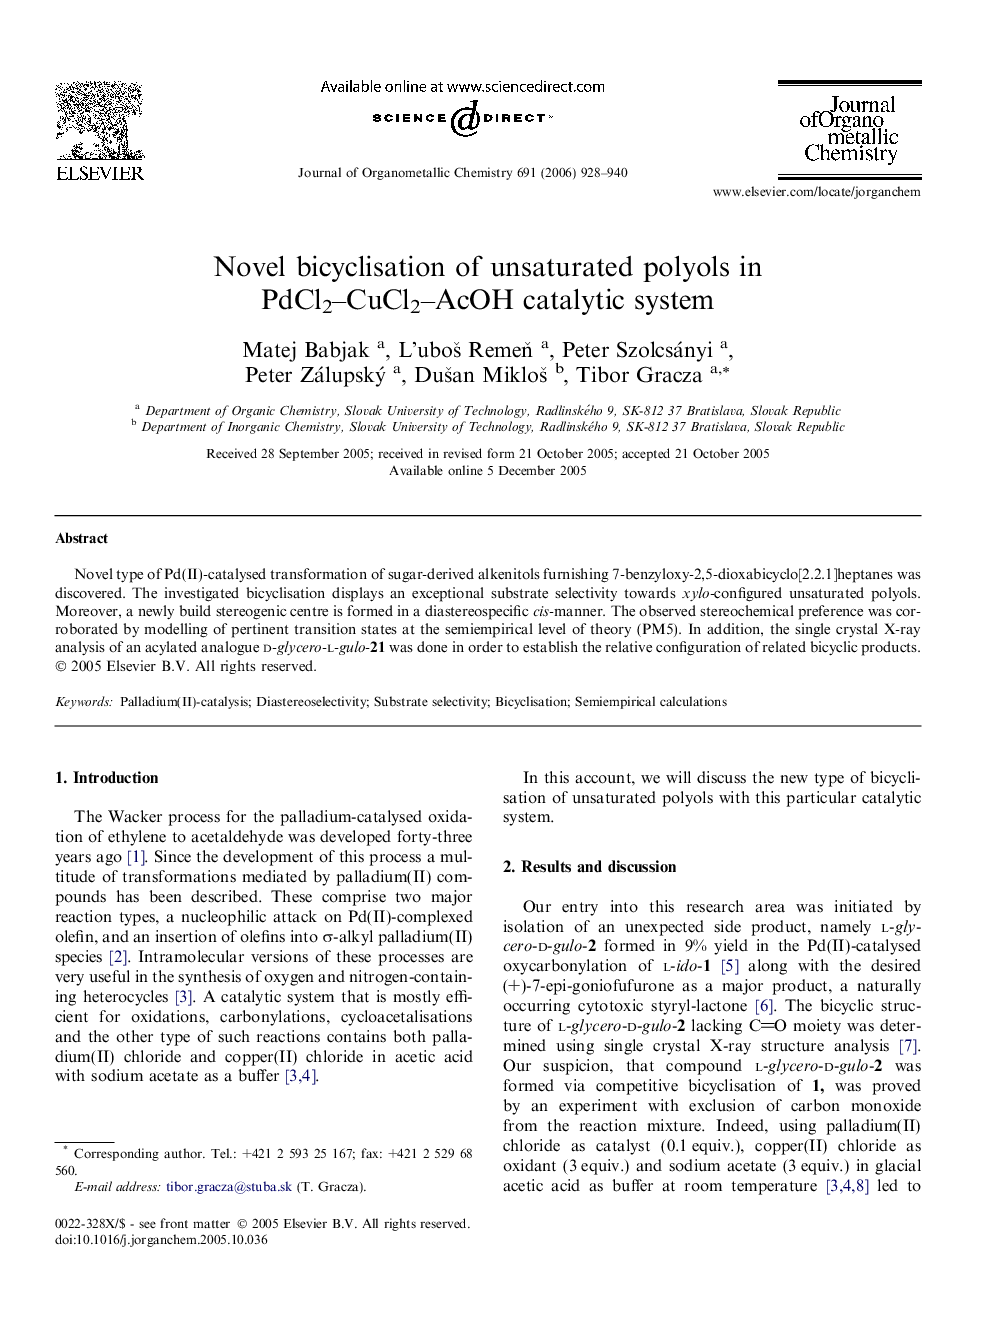 Novel bicyclisation of unsaturated polyols in PdCl2–CuCl2–AcOH catalytic system